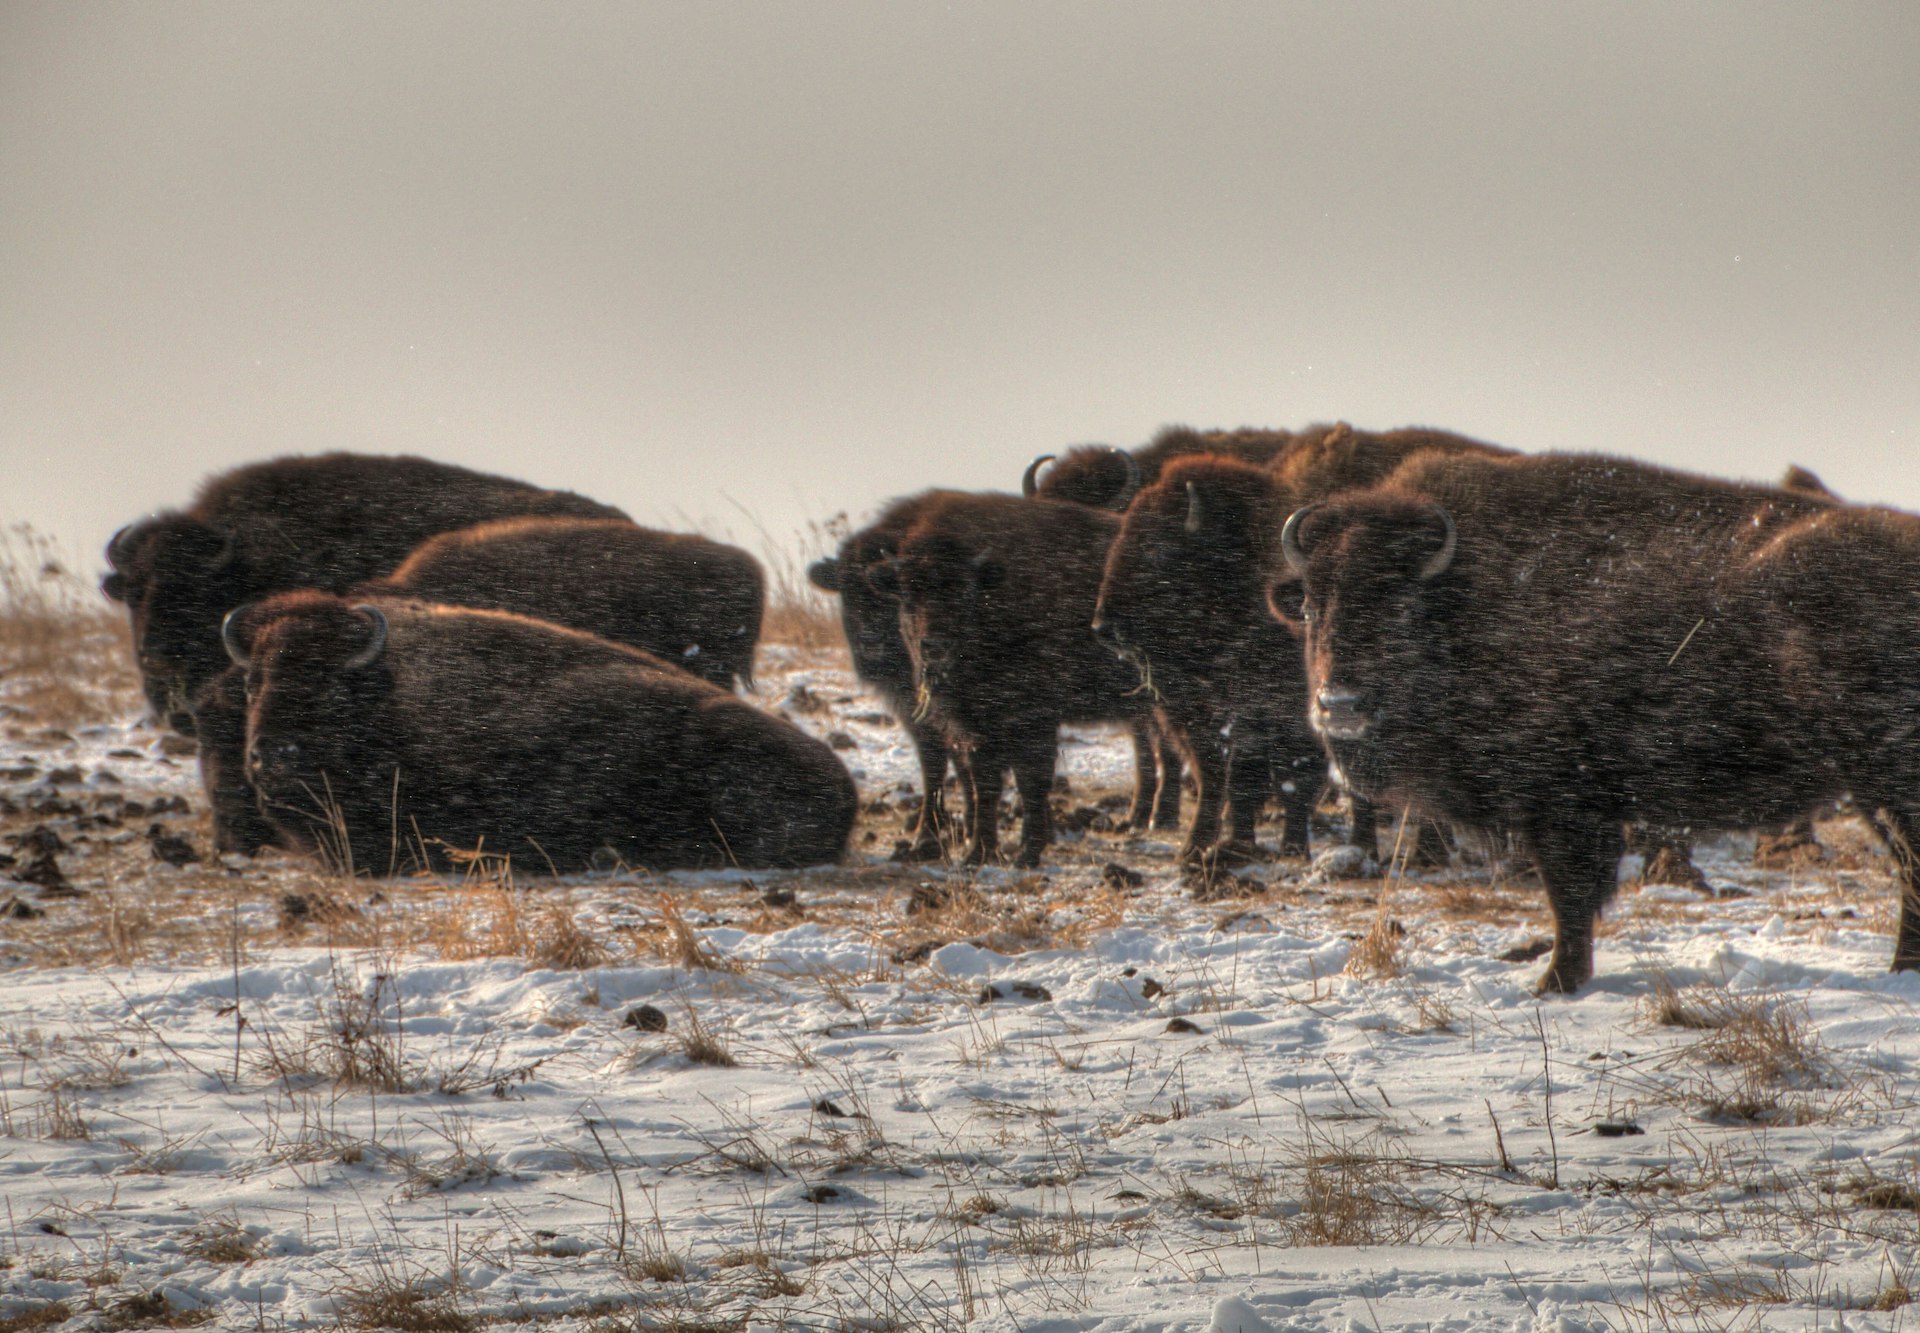 A group of bison in the snow at Blue Mounds State Park, near Luverne, Minnesota